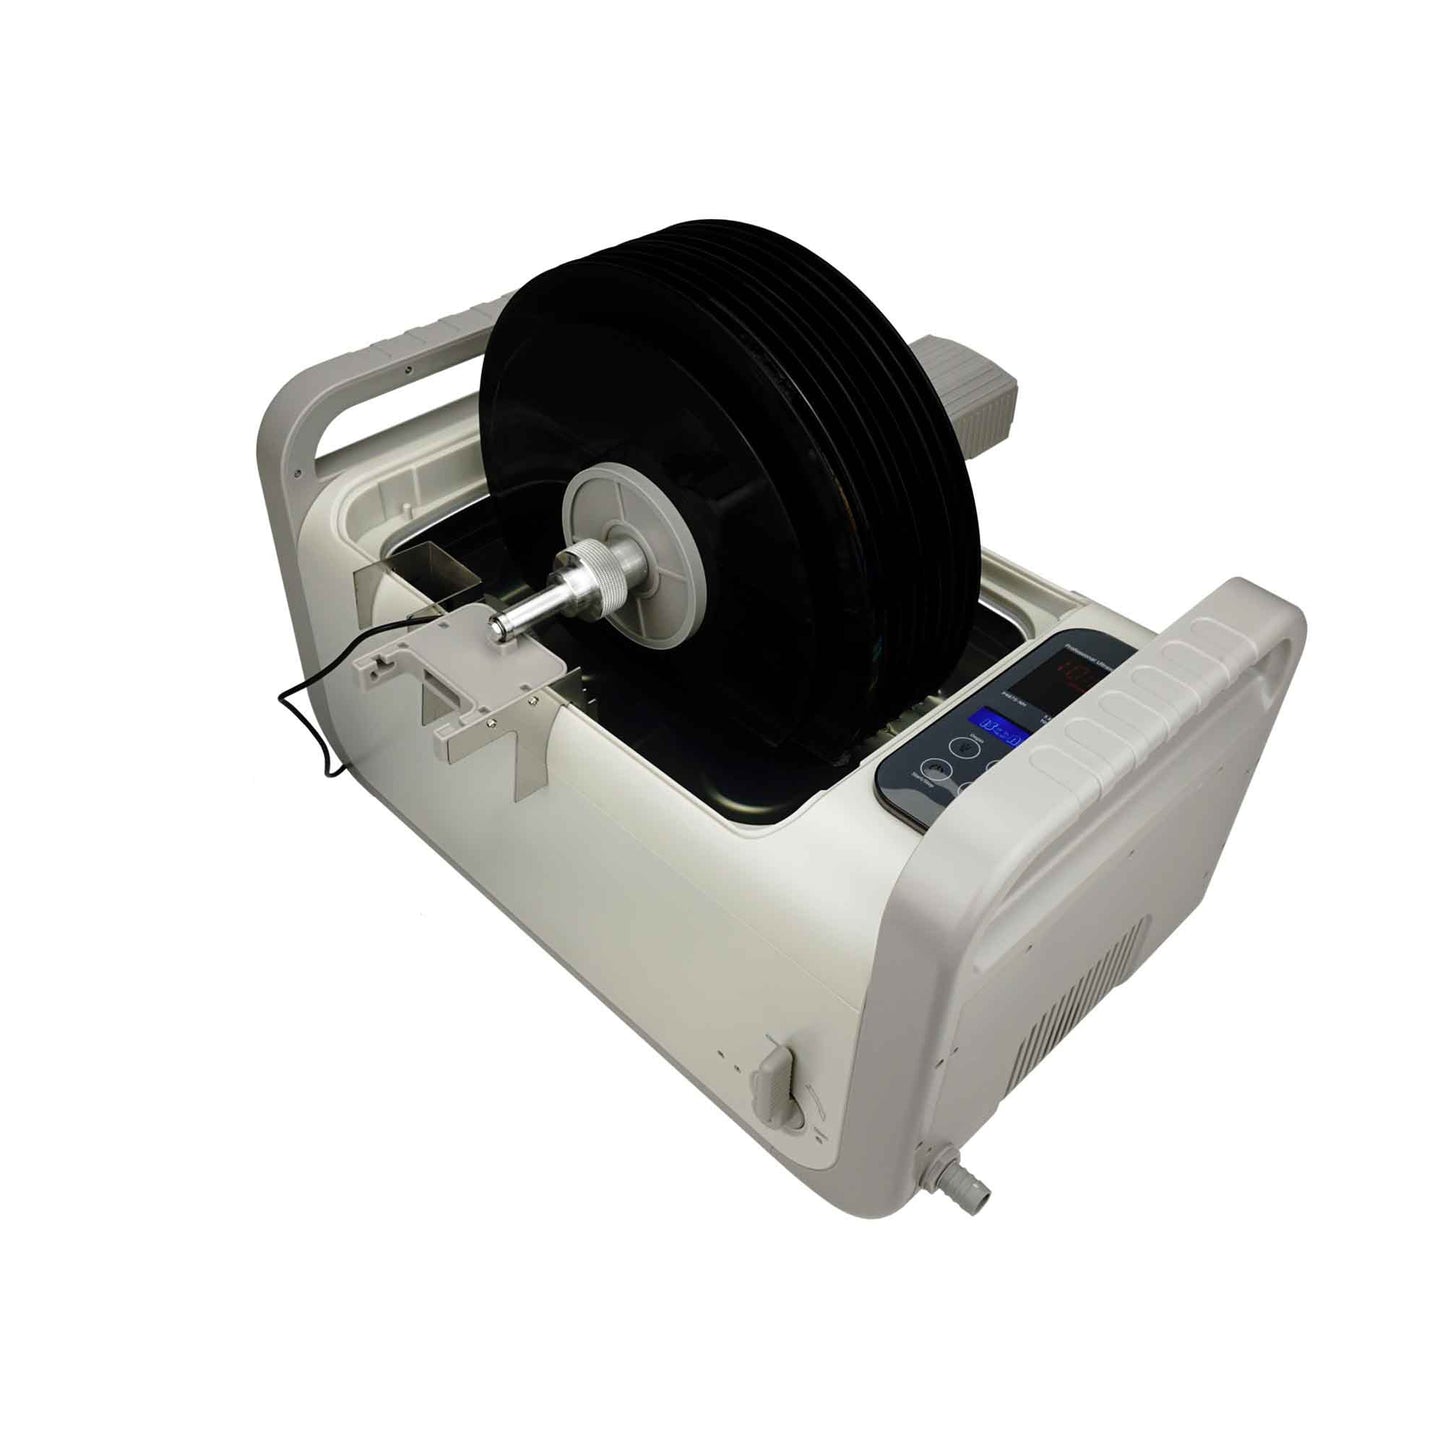 P4875-NH+MVR10-PRO | iSonic® Motorized Ultrasonic Vinyl Record Cleaner for 10 LP Records, with Filter and Spin Drying, 2Gal/7.5L